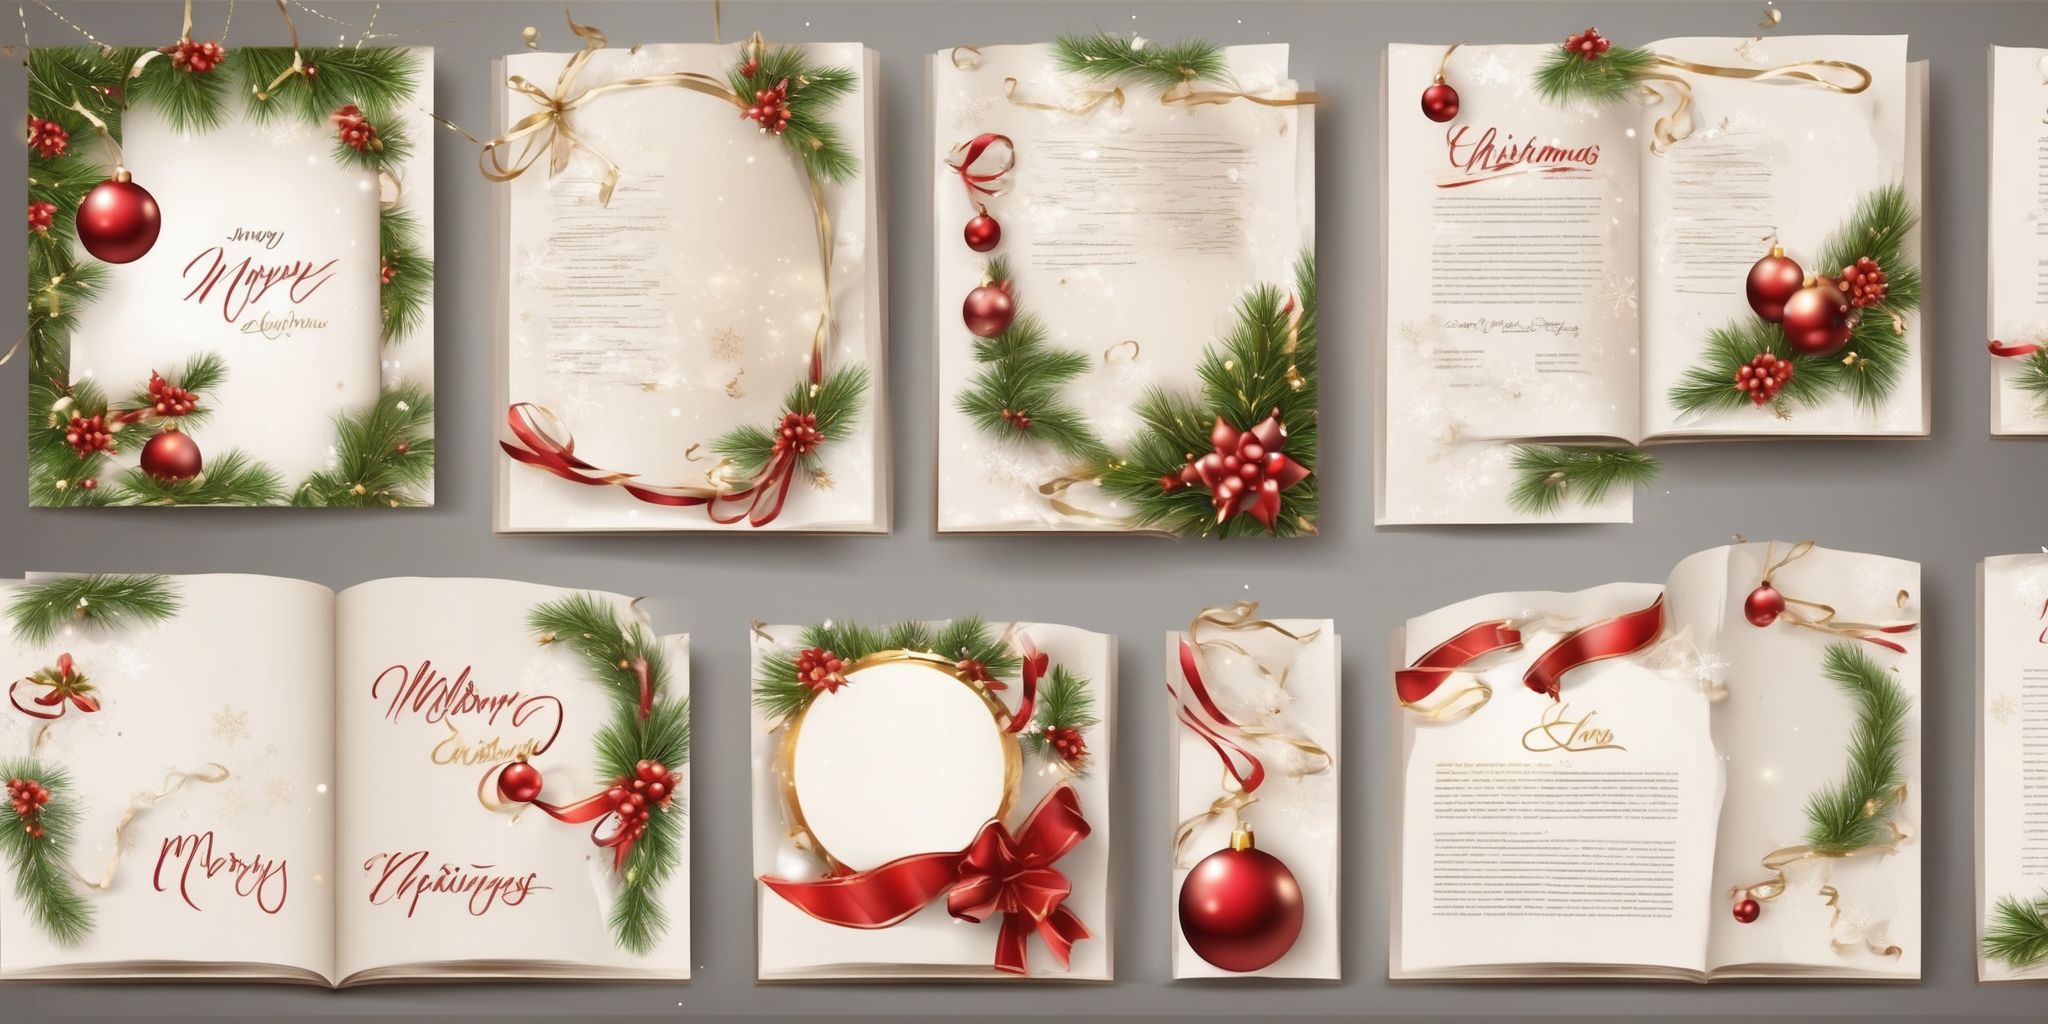 Pages in realistic Christmas style